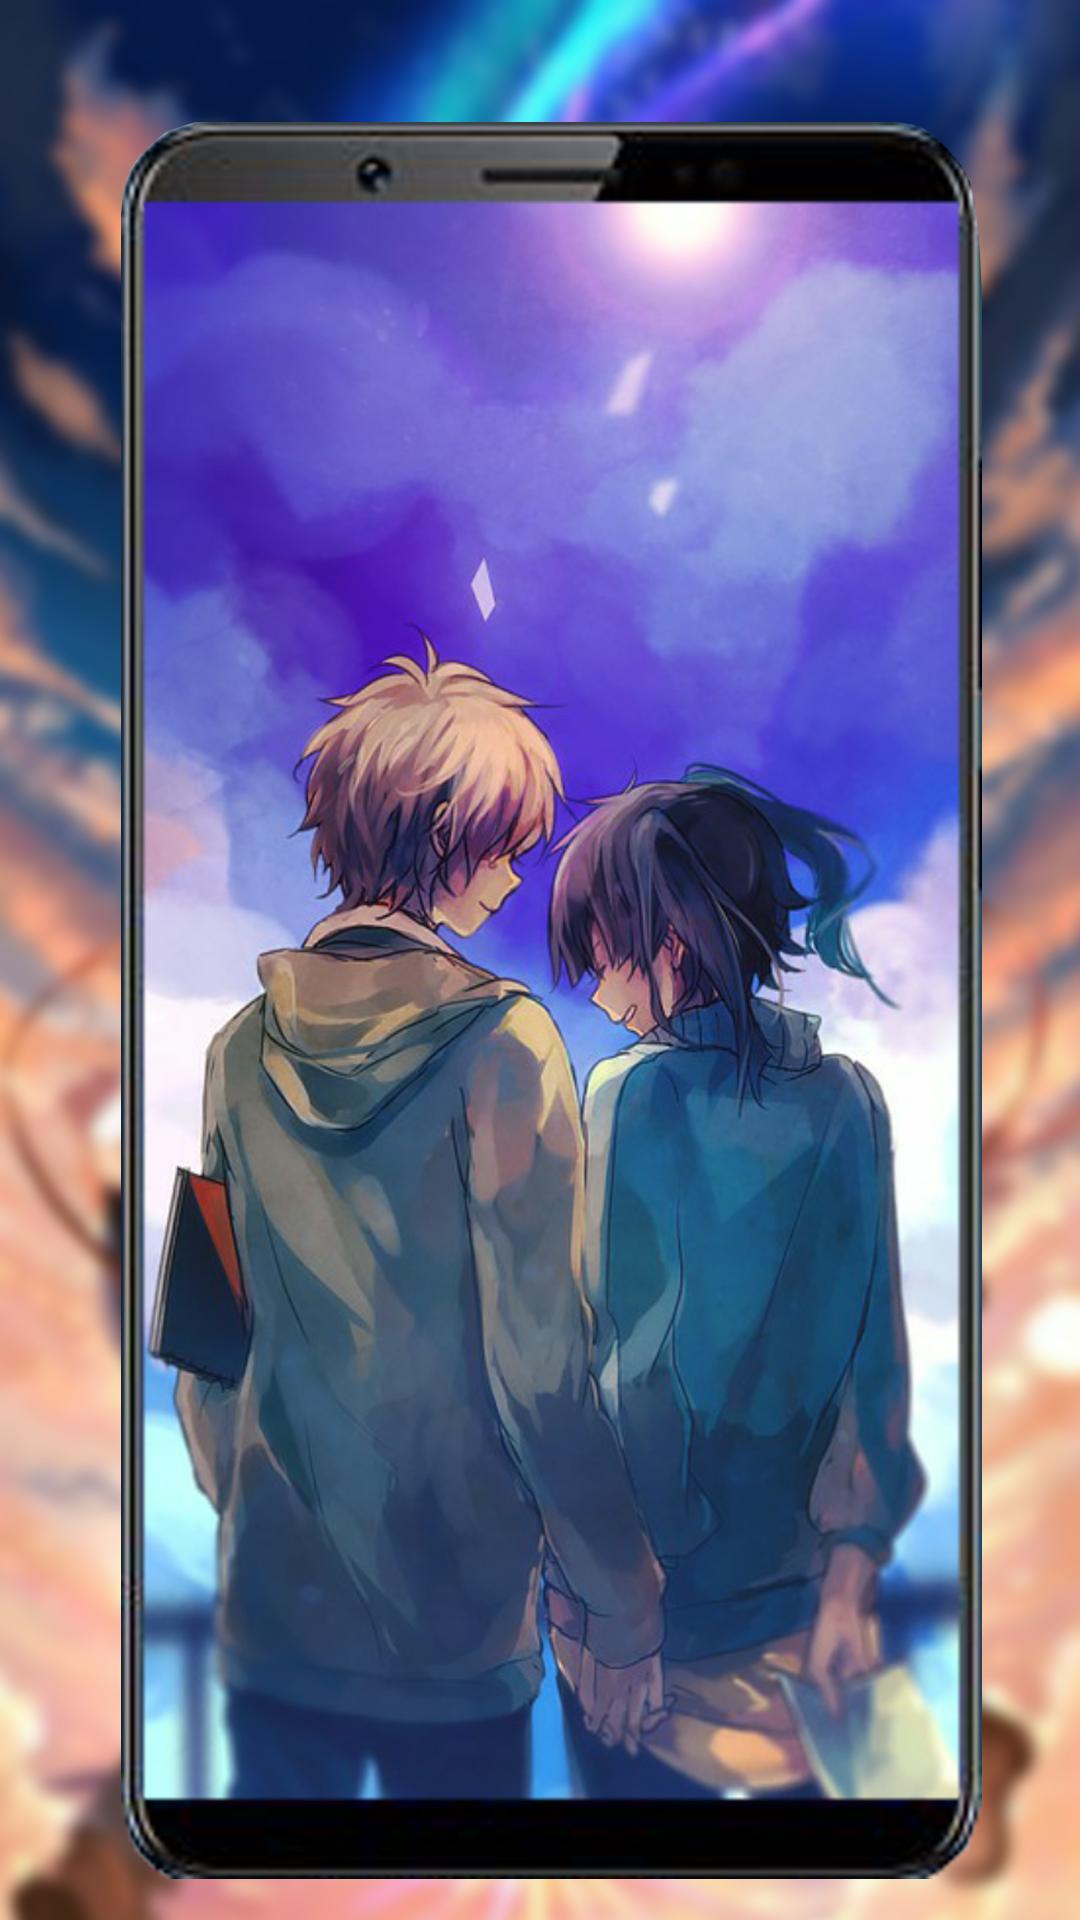 Your Name Anime Wallpaper Art For Android Apk Download